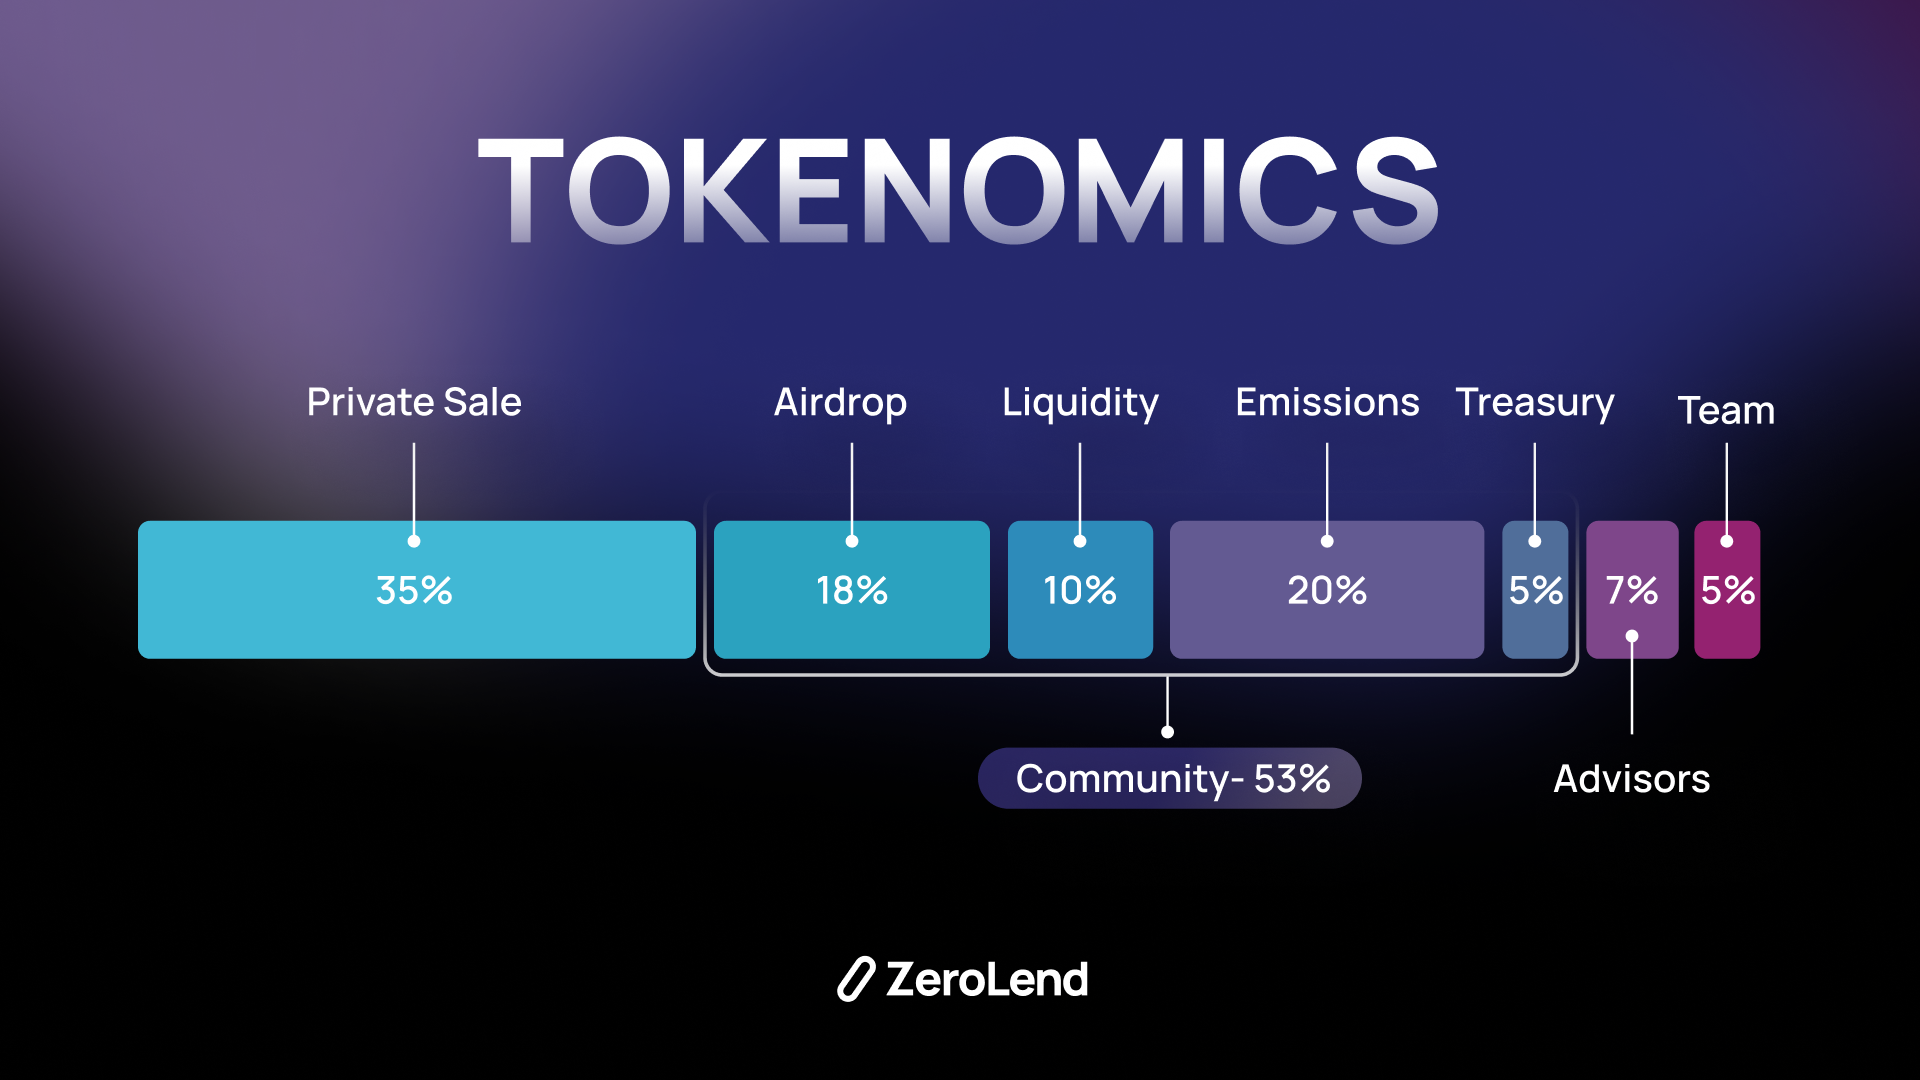 The tokenomics is engineered in a way that the highest allocation is for the community, i.e. 53%.